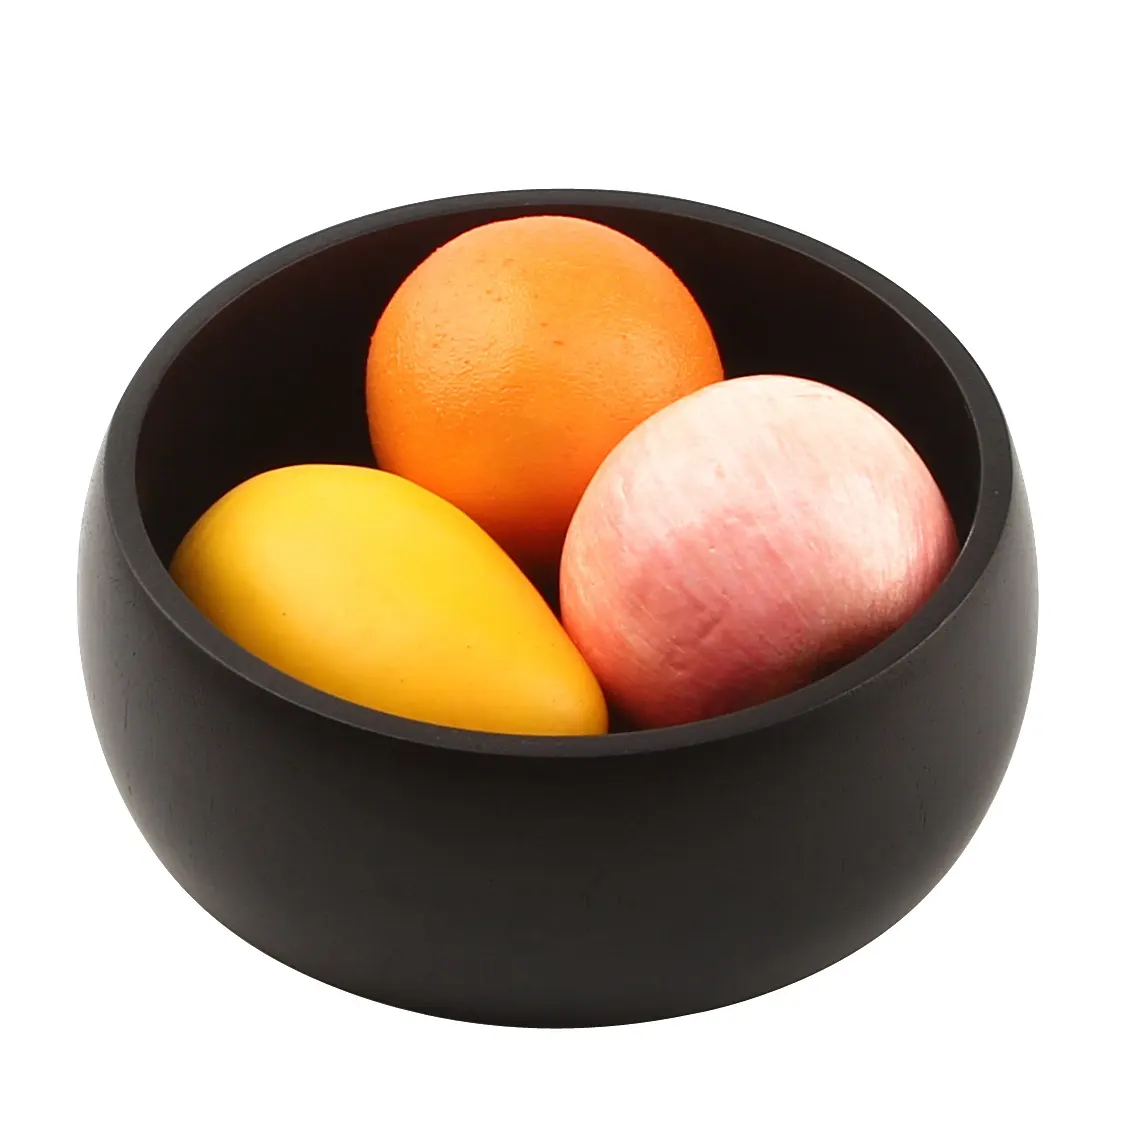 Wooden Handmade Black Bowl for for Rice Miso Serving Home Kitchen Tableware